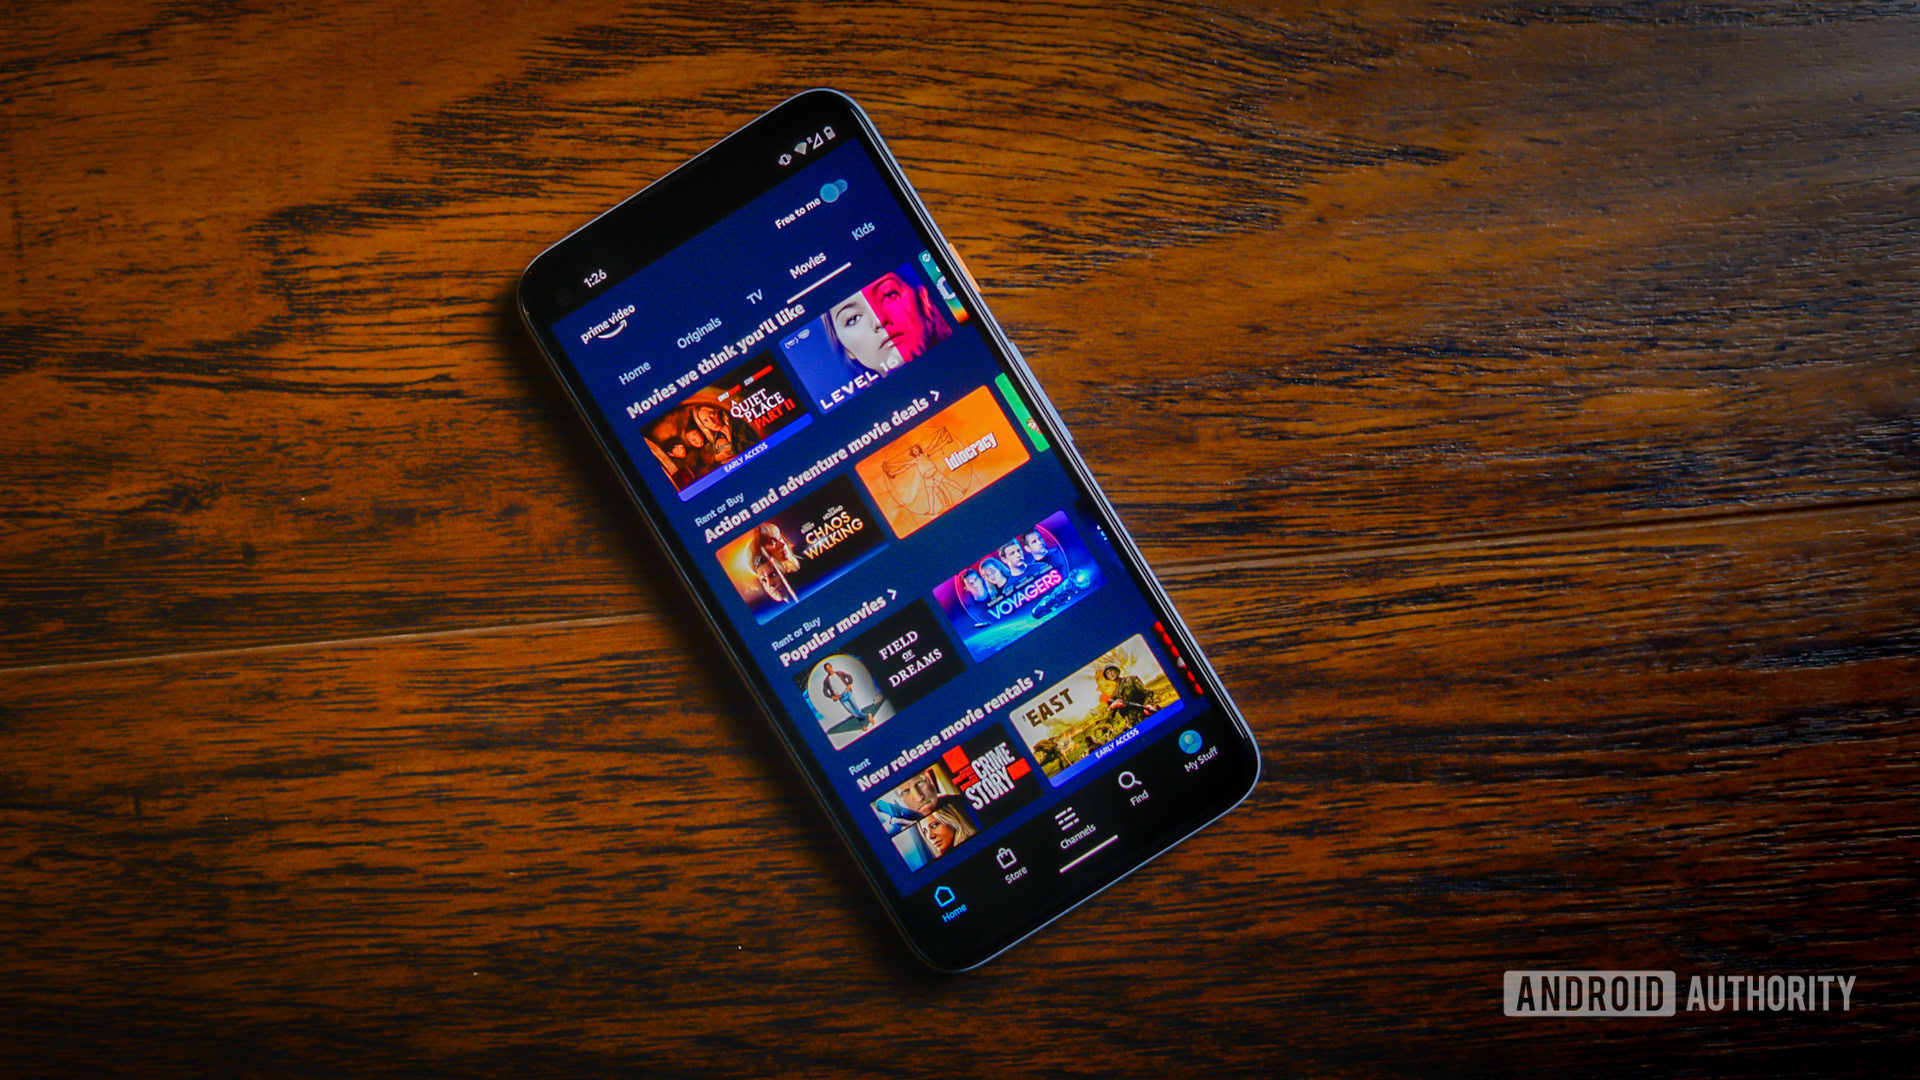 Amazon Prime Video movies and shows on a phone screen.